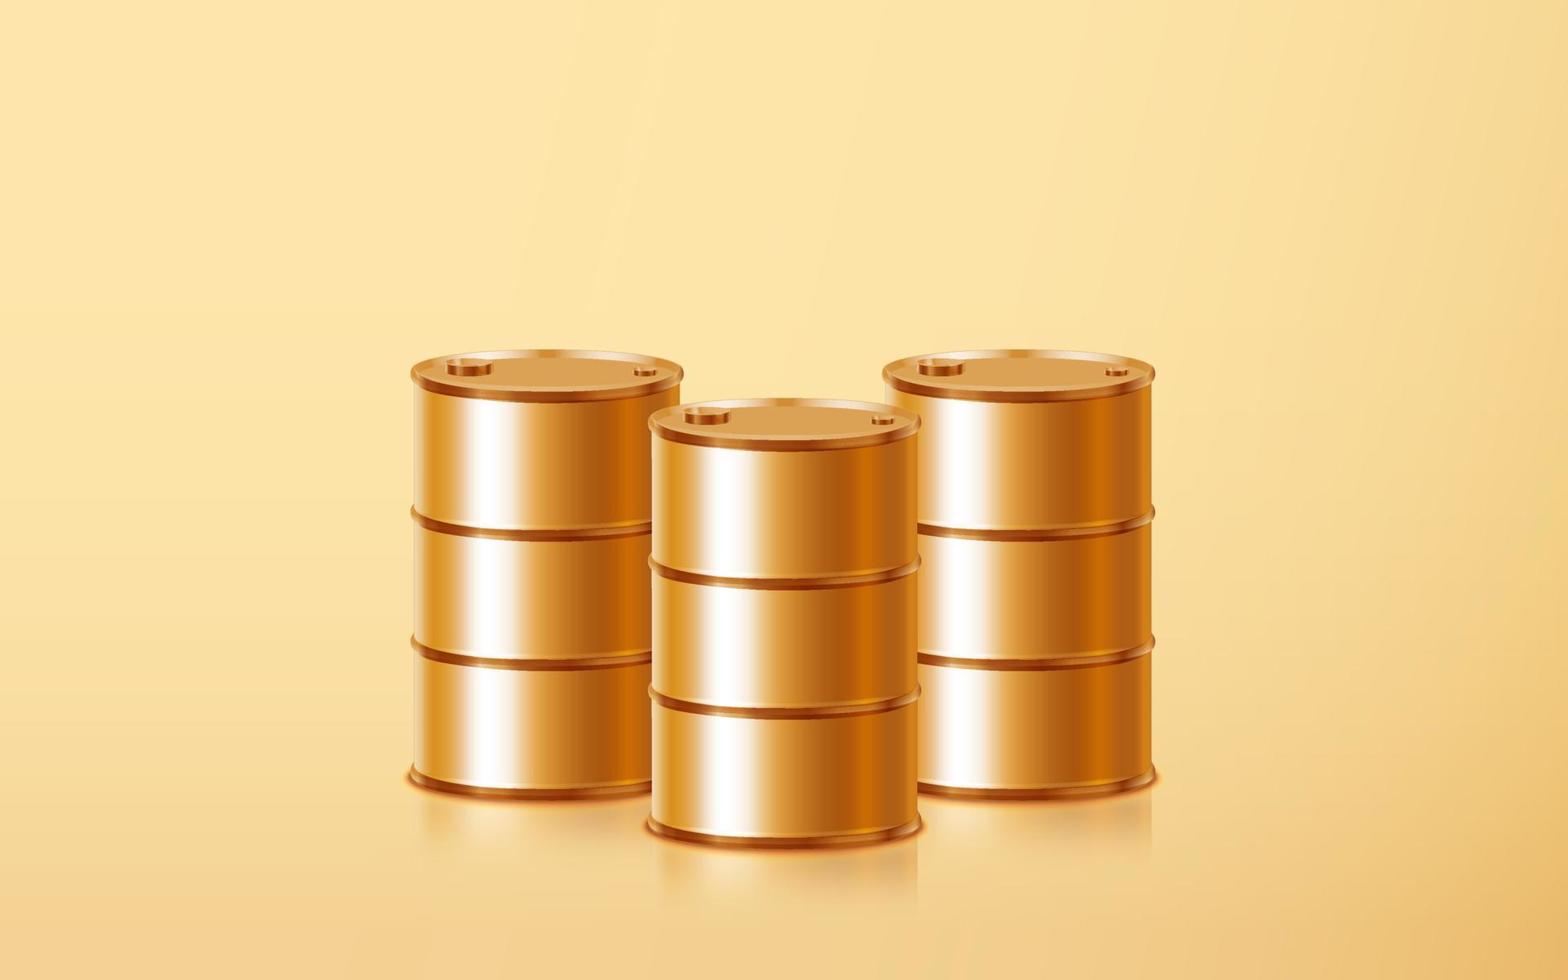 Realistic three golden oil barrels isolated on gold background. Symbol of gasoline, diesel, petro, gas fuel industry. Gold metal petroleum gallon. Concept of energy industry in 3d vector illustration